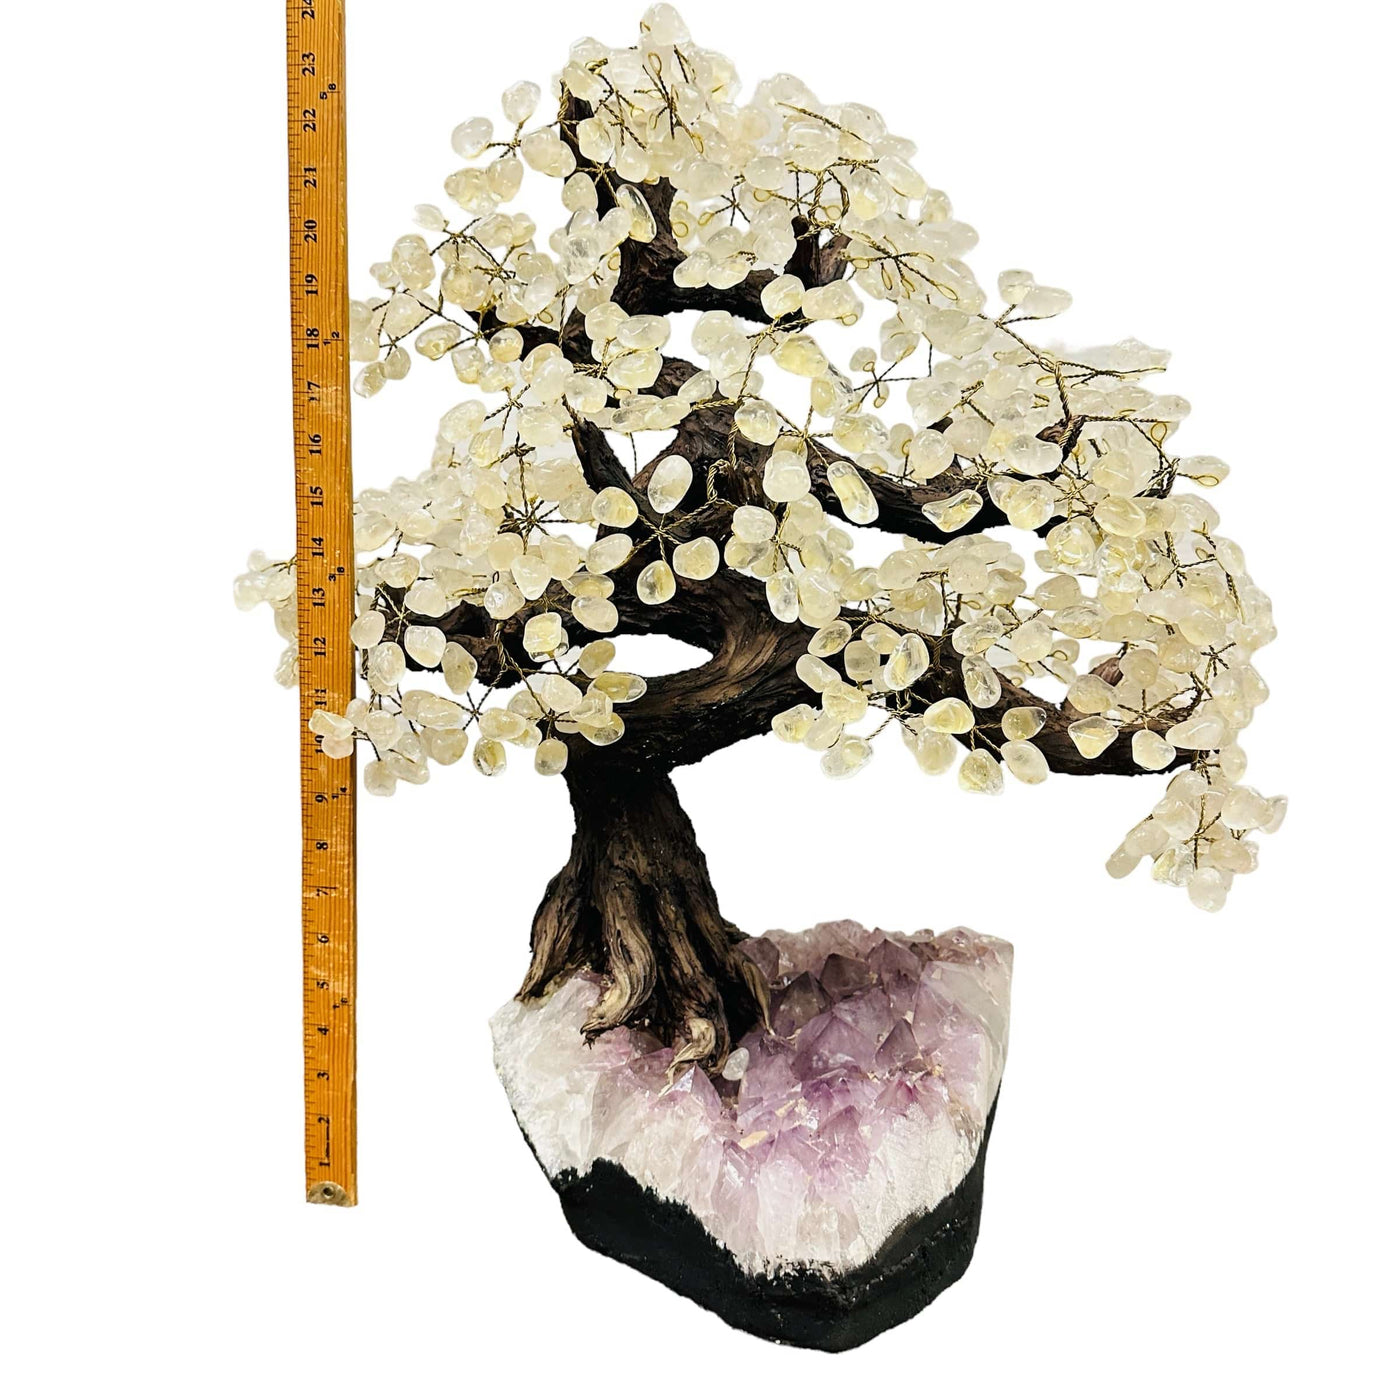 crystal quartz tree on amethyst stand next to a ruler for size reference